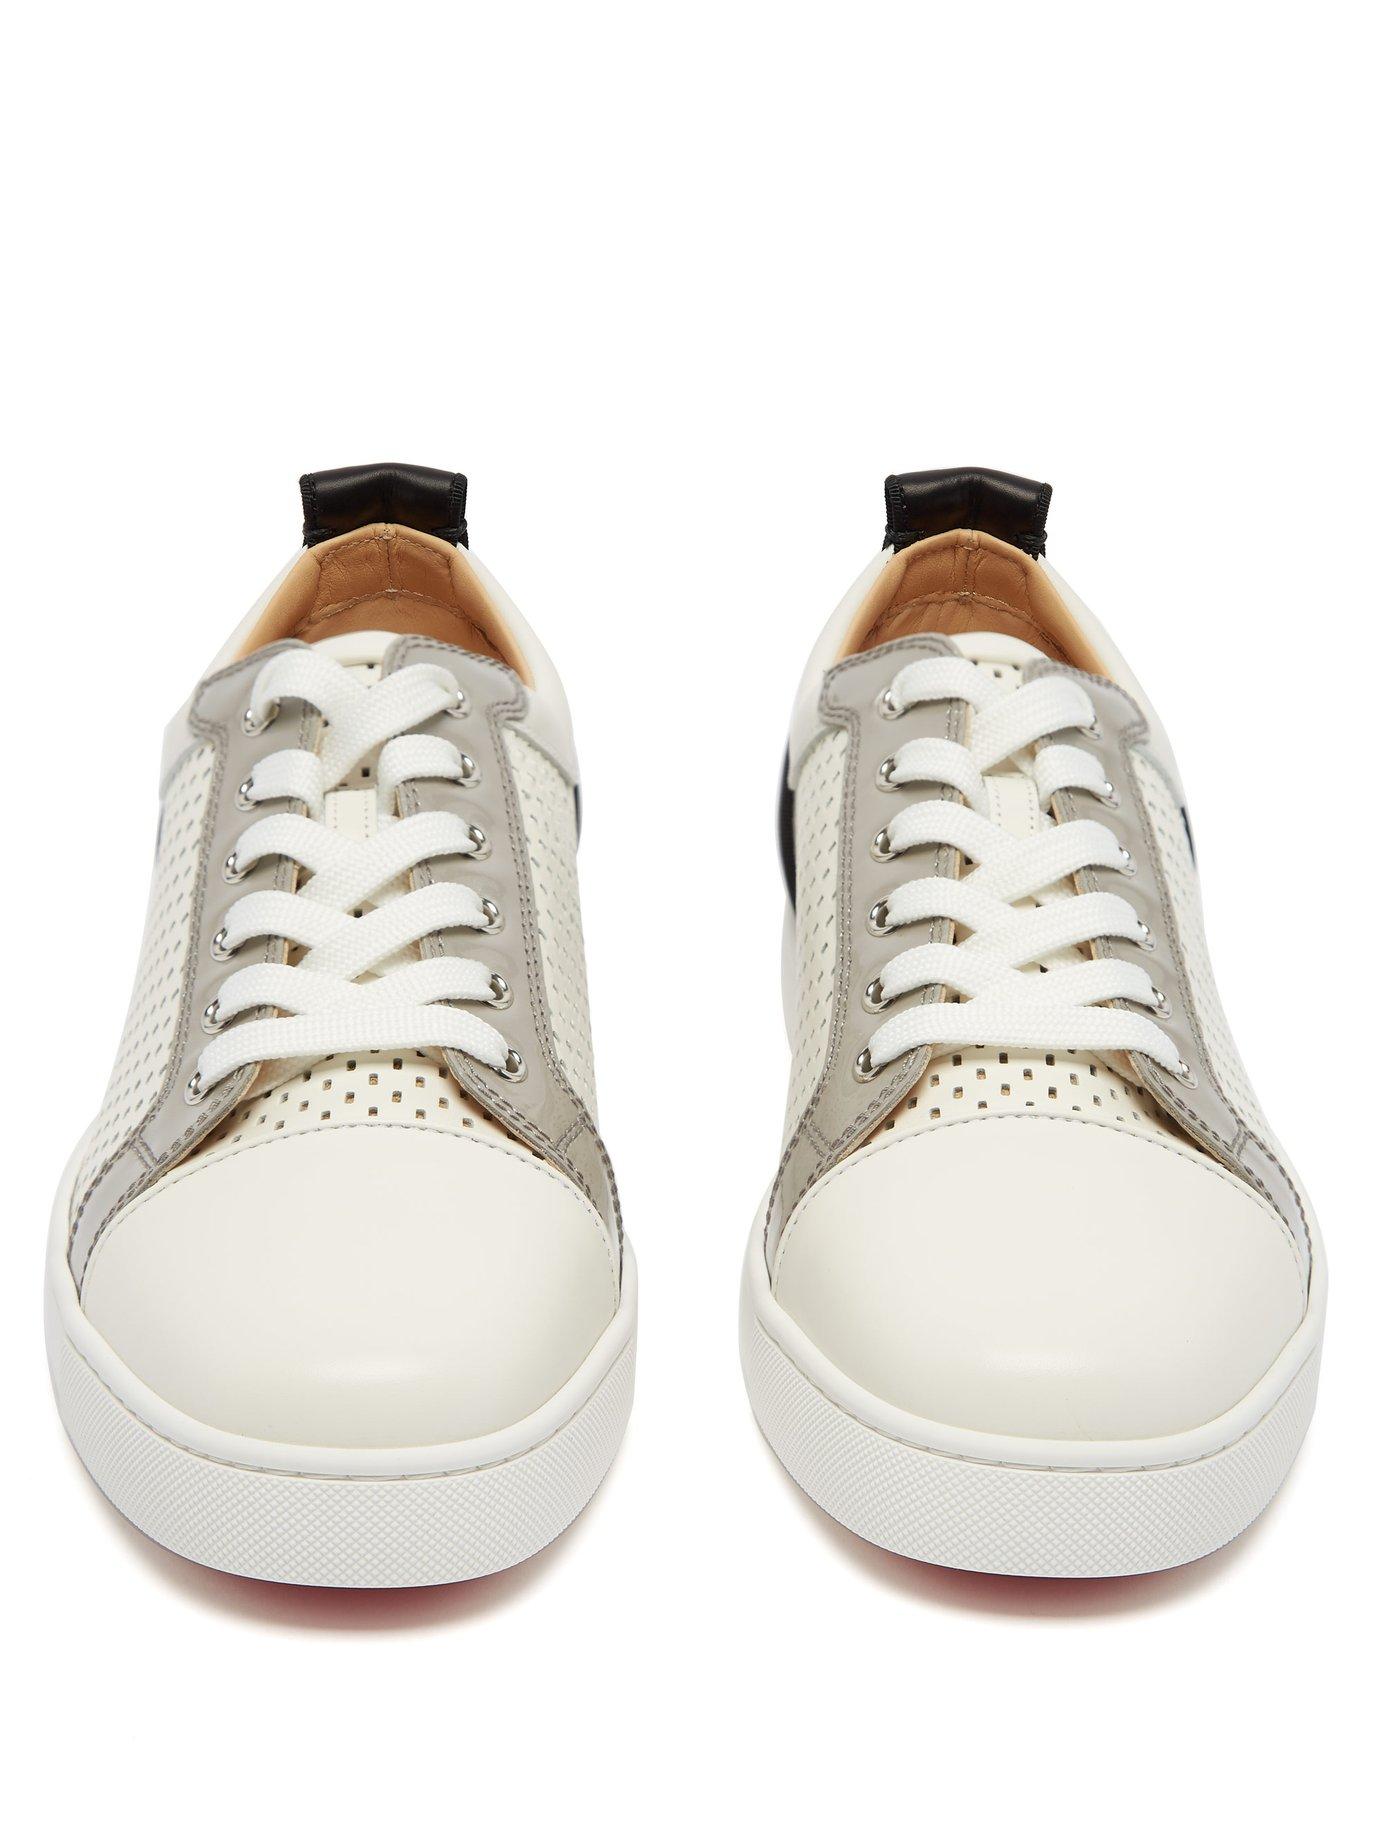 Christian Louboutin Louis Junior Flat Leather Sneakers in White for Men -  Lyst